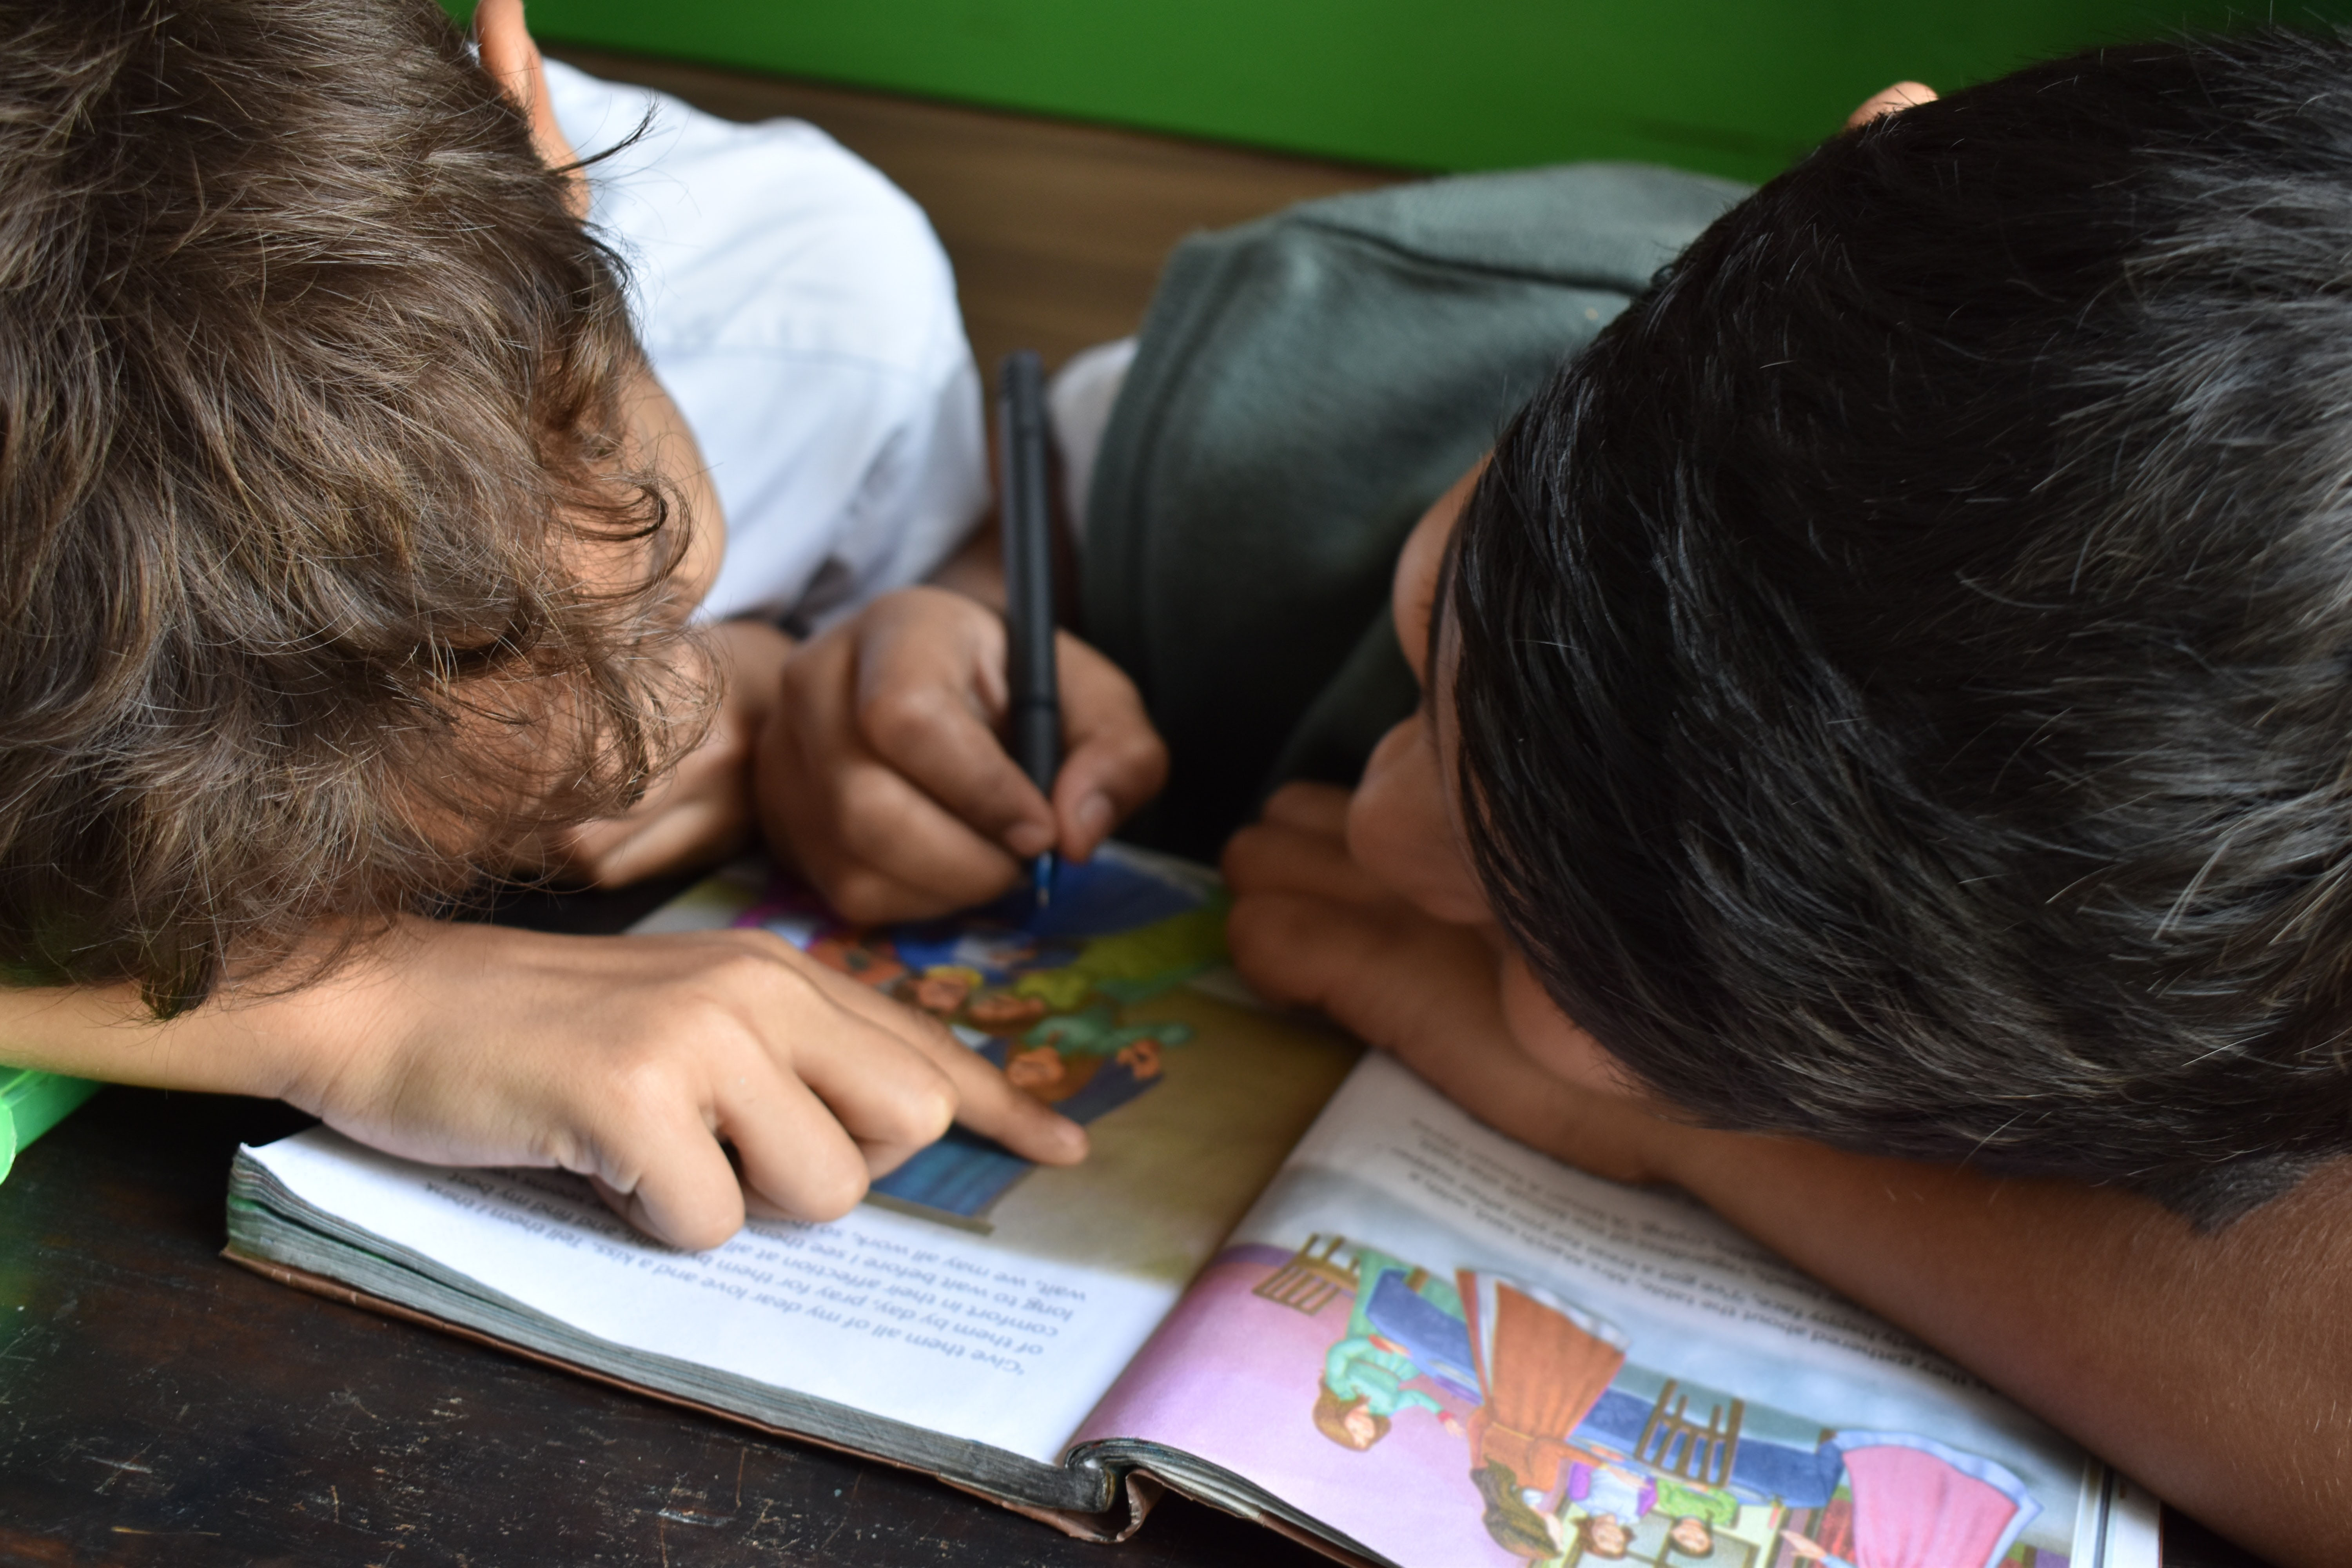 Students reading together